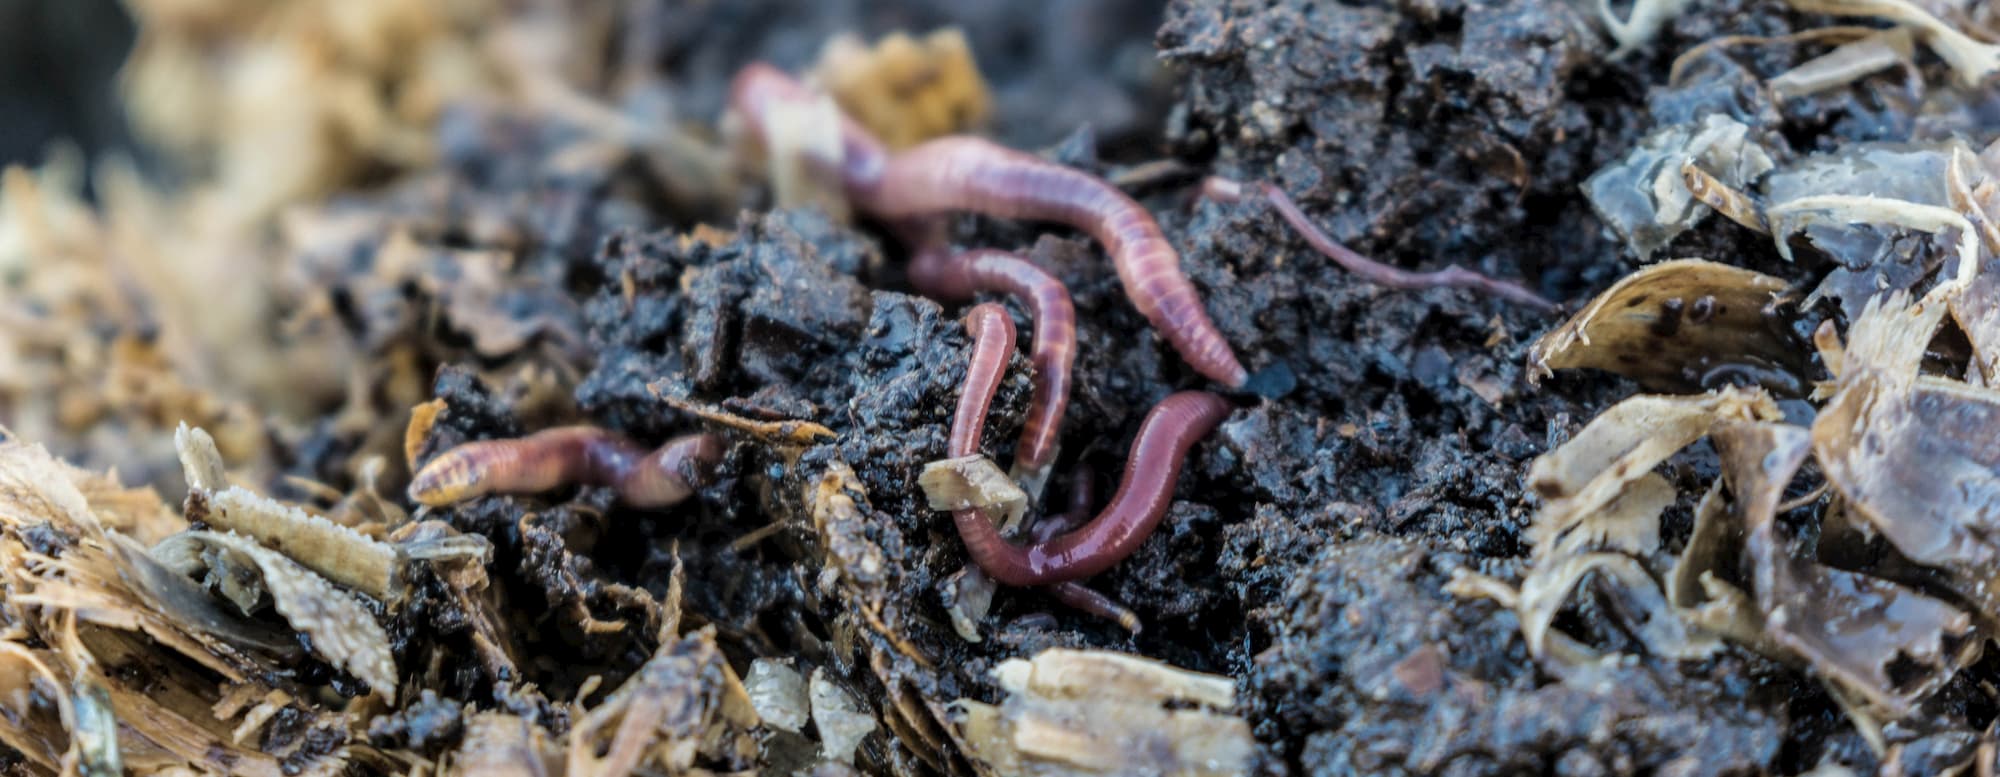 earthworms in its middle